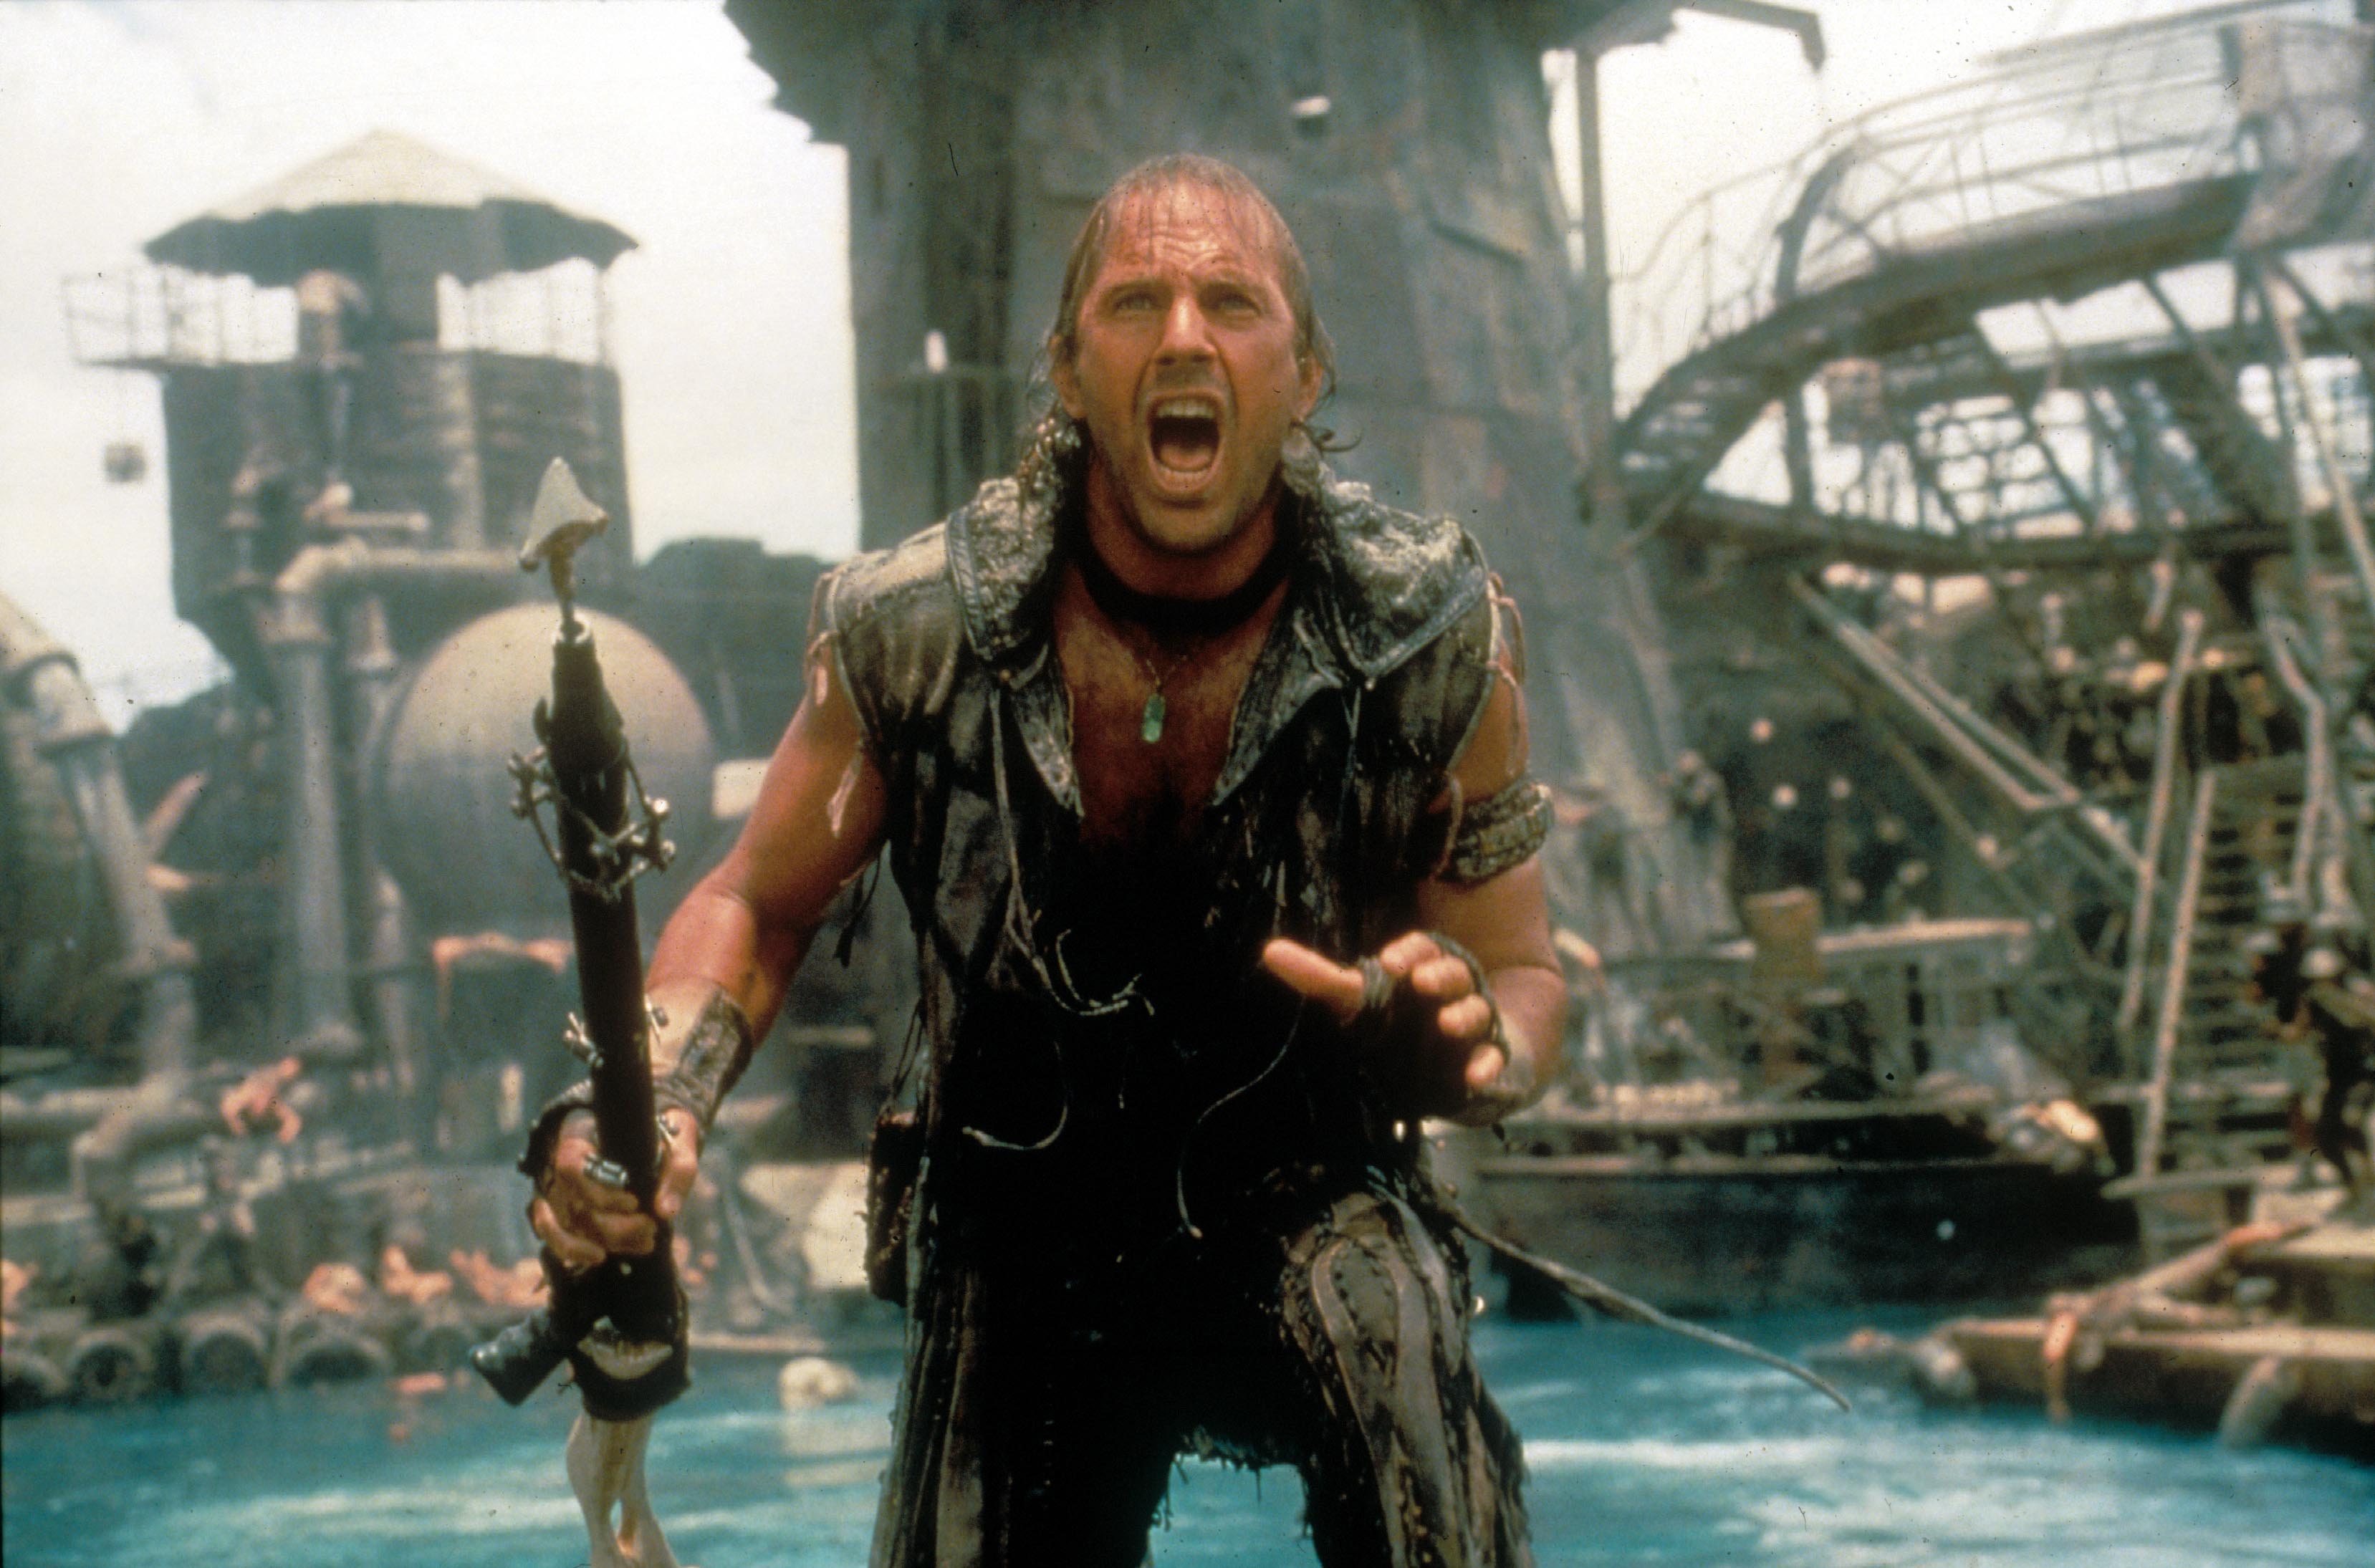 https://www.closerweekly.com/wp-content/uploads/2020/08/kevin-costners-best-movie-roles-waterworld.jpg?fit=800%2C528&quality=86&strip=all